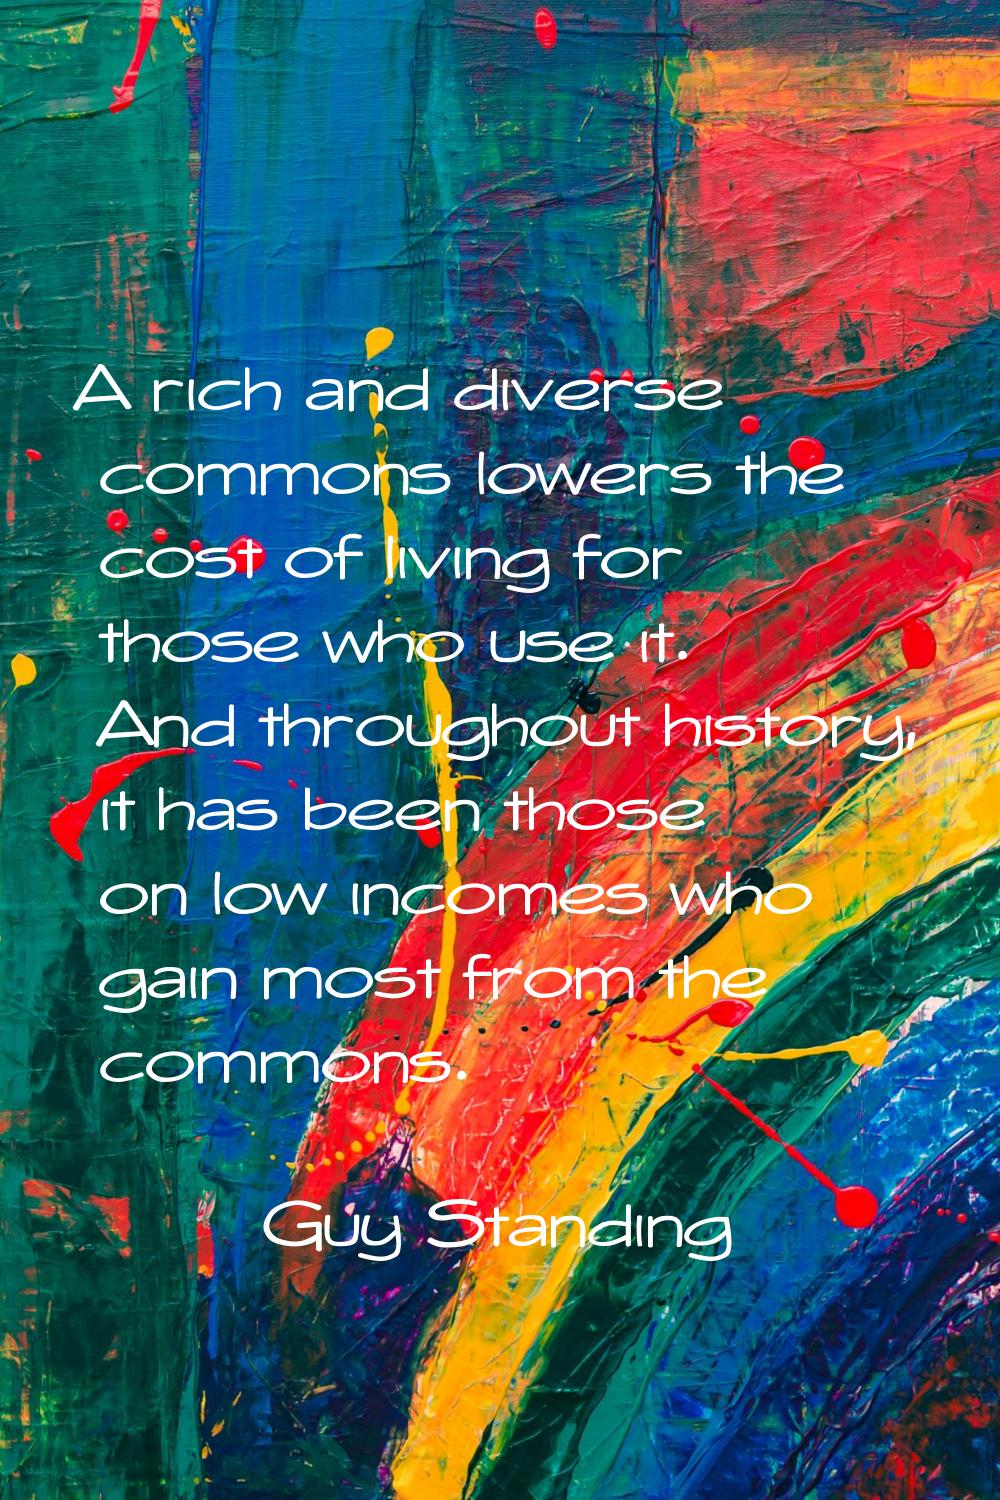 A rich and diverse commons lowers the cost of living for those who use it. And throughout history, 